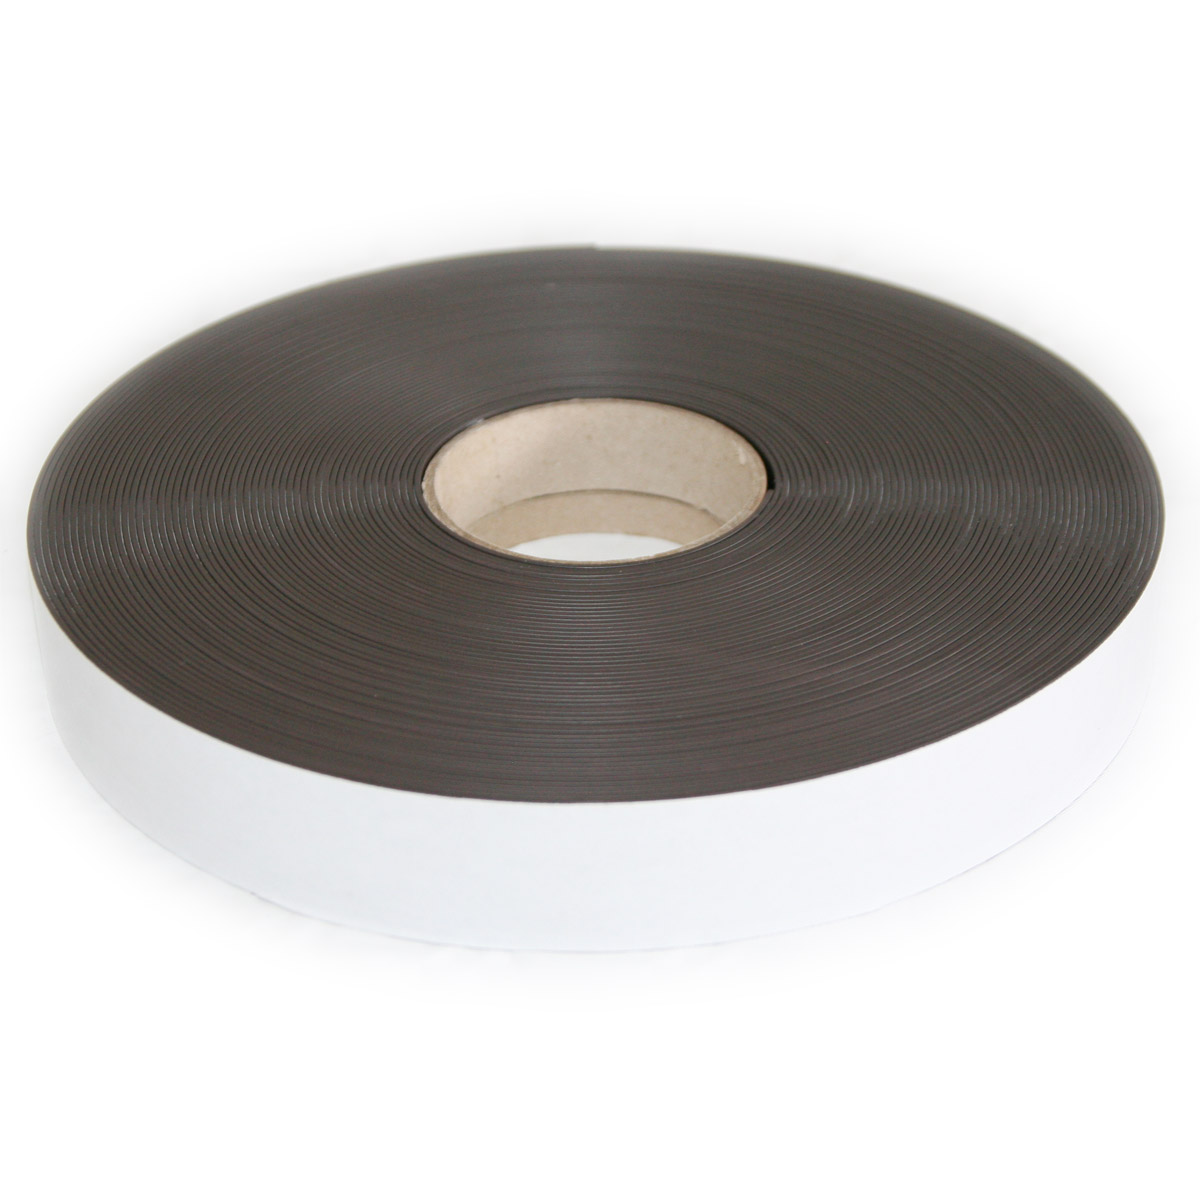 Self-adhesive magnetic tape with Standard glue